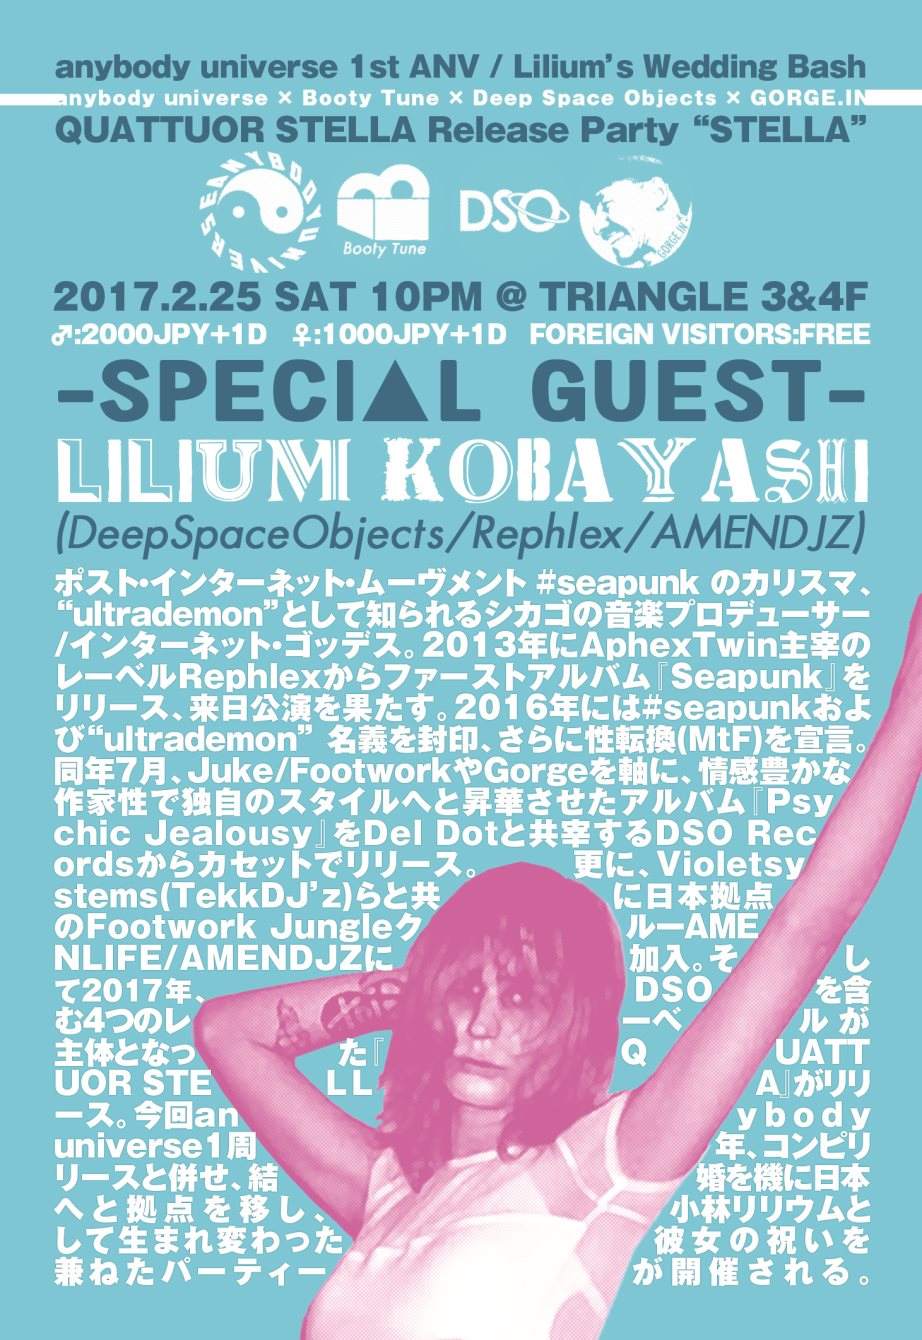 Anybodyuniverse×bootytune×dso×gorge.IN 'Quattuor Stella' Release Party - フライヤー裏